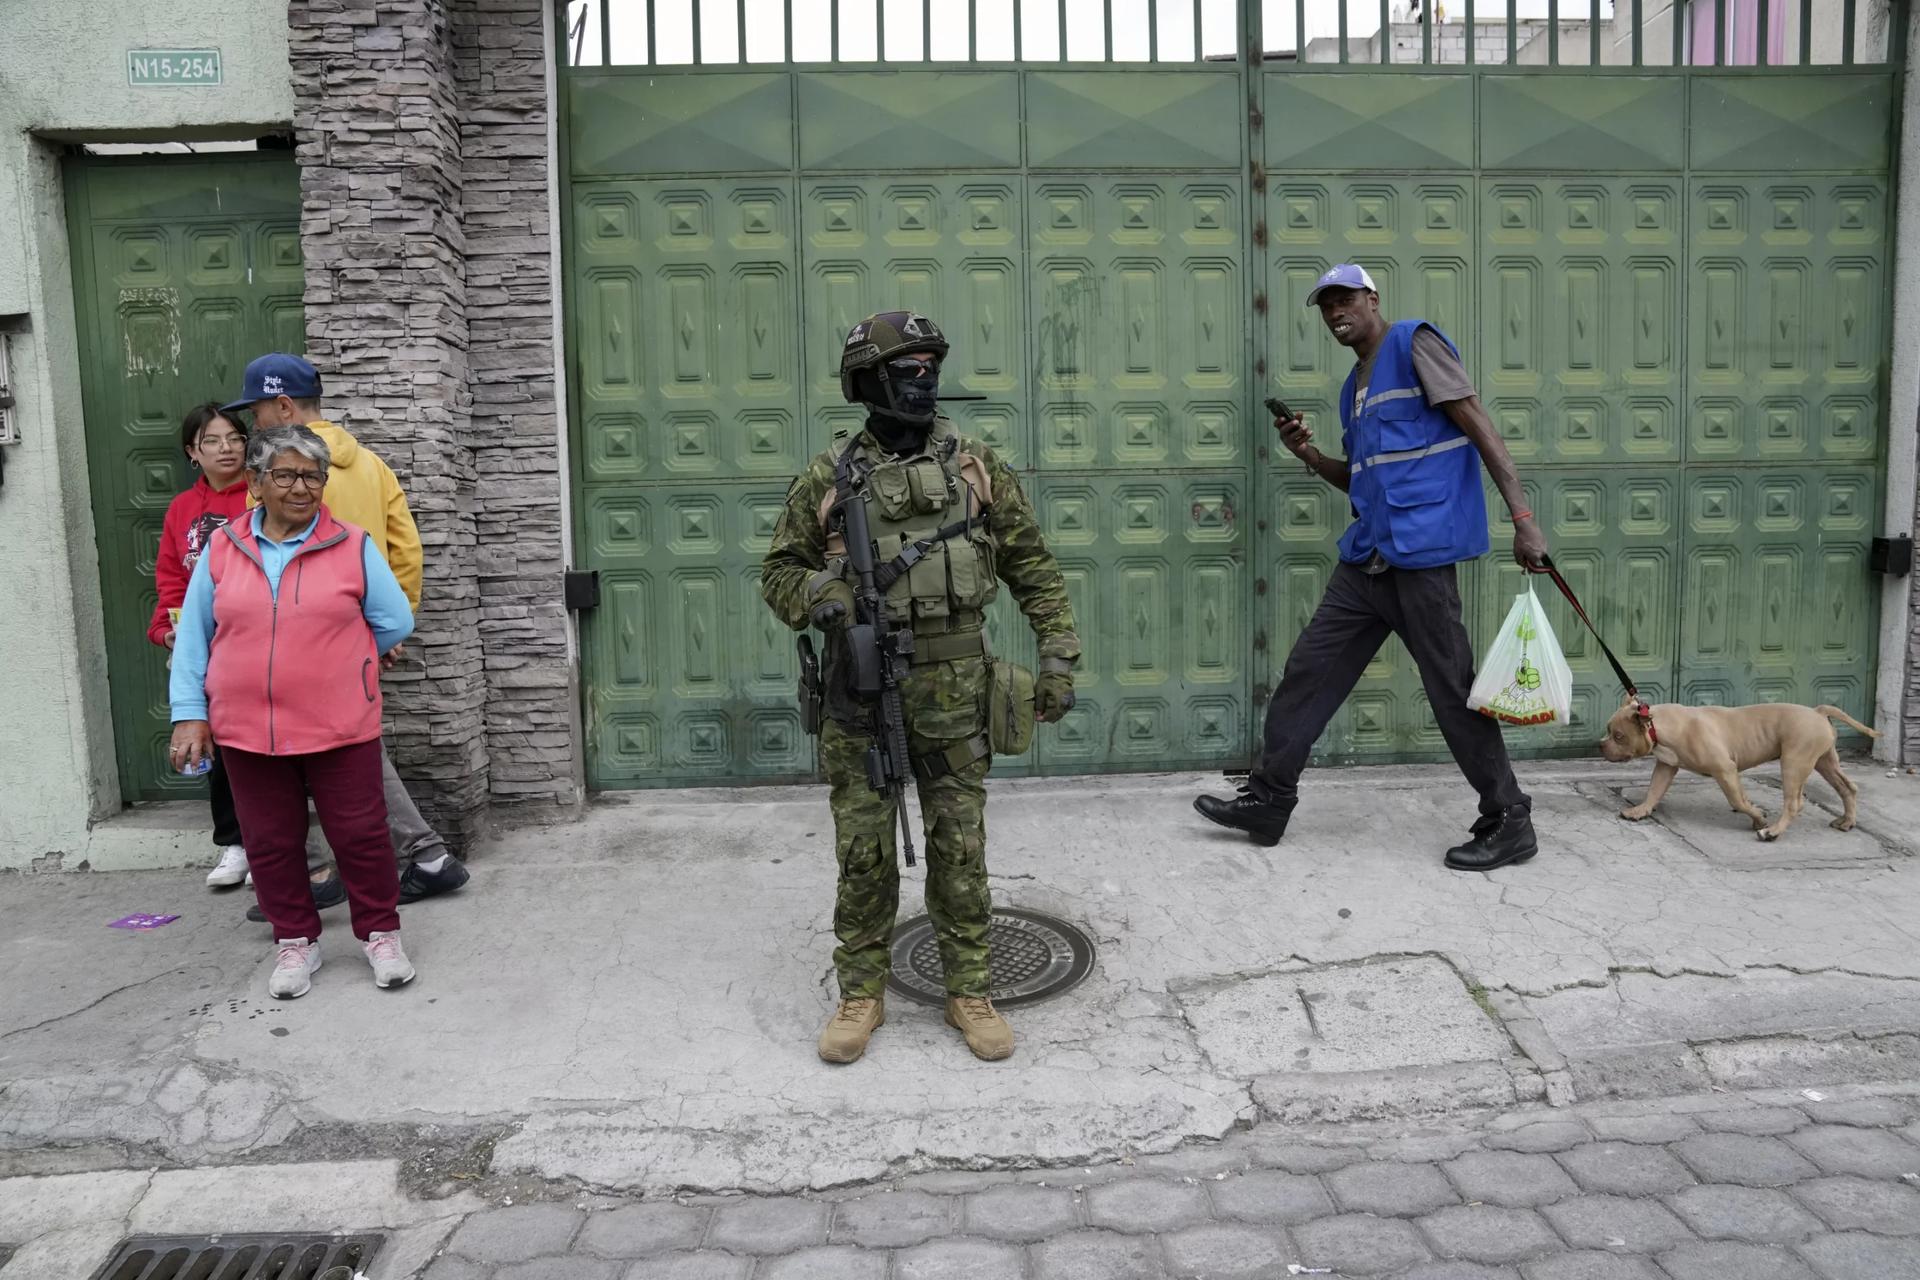 Militarization of Ecuador prisons causing starvation and torture, Church officials claim